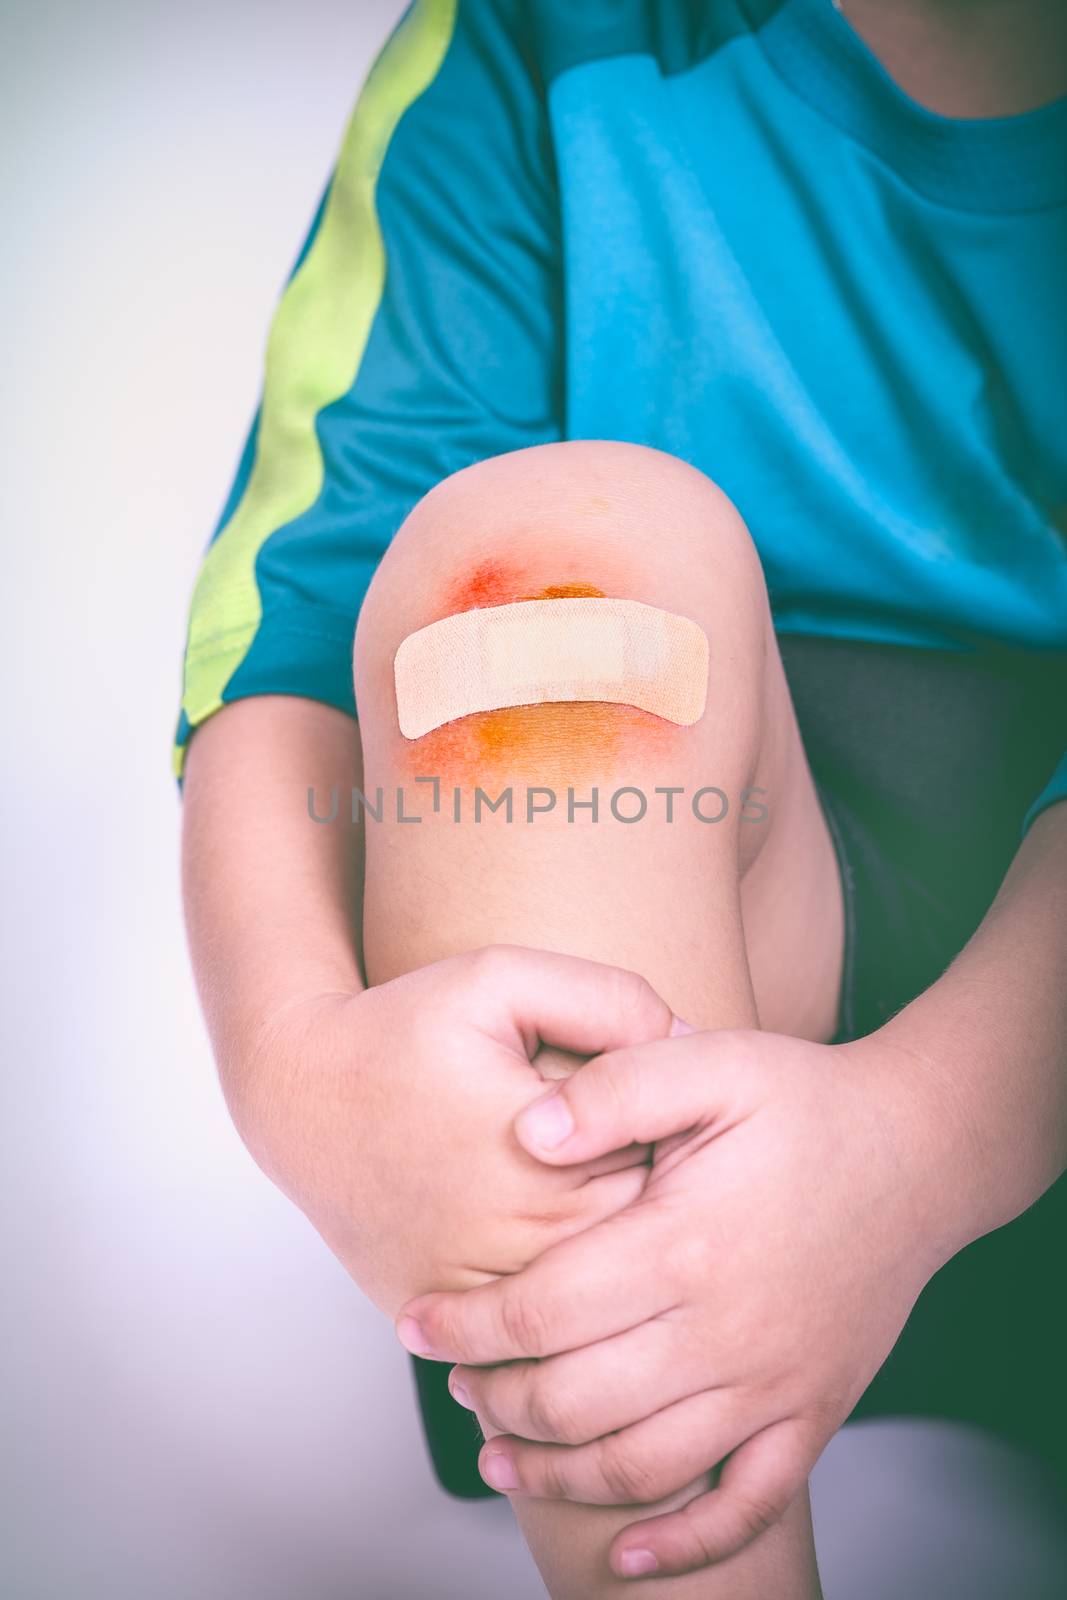 Athlete child injured. Child knee with a plaster and bruise. Selective focus, wound in focus. Human health care and medicine concept. Vintage style.